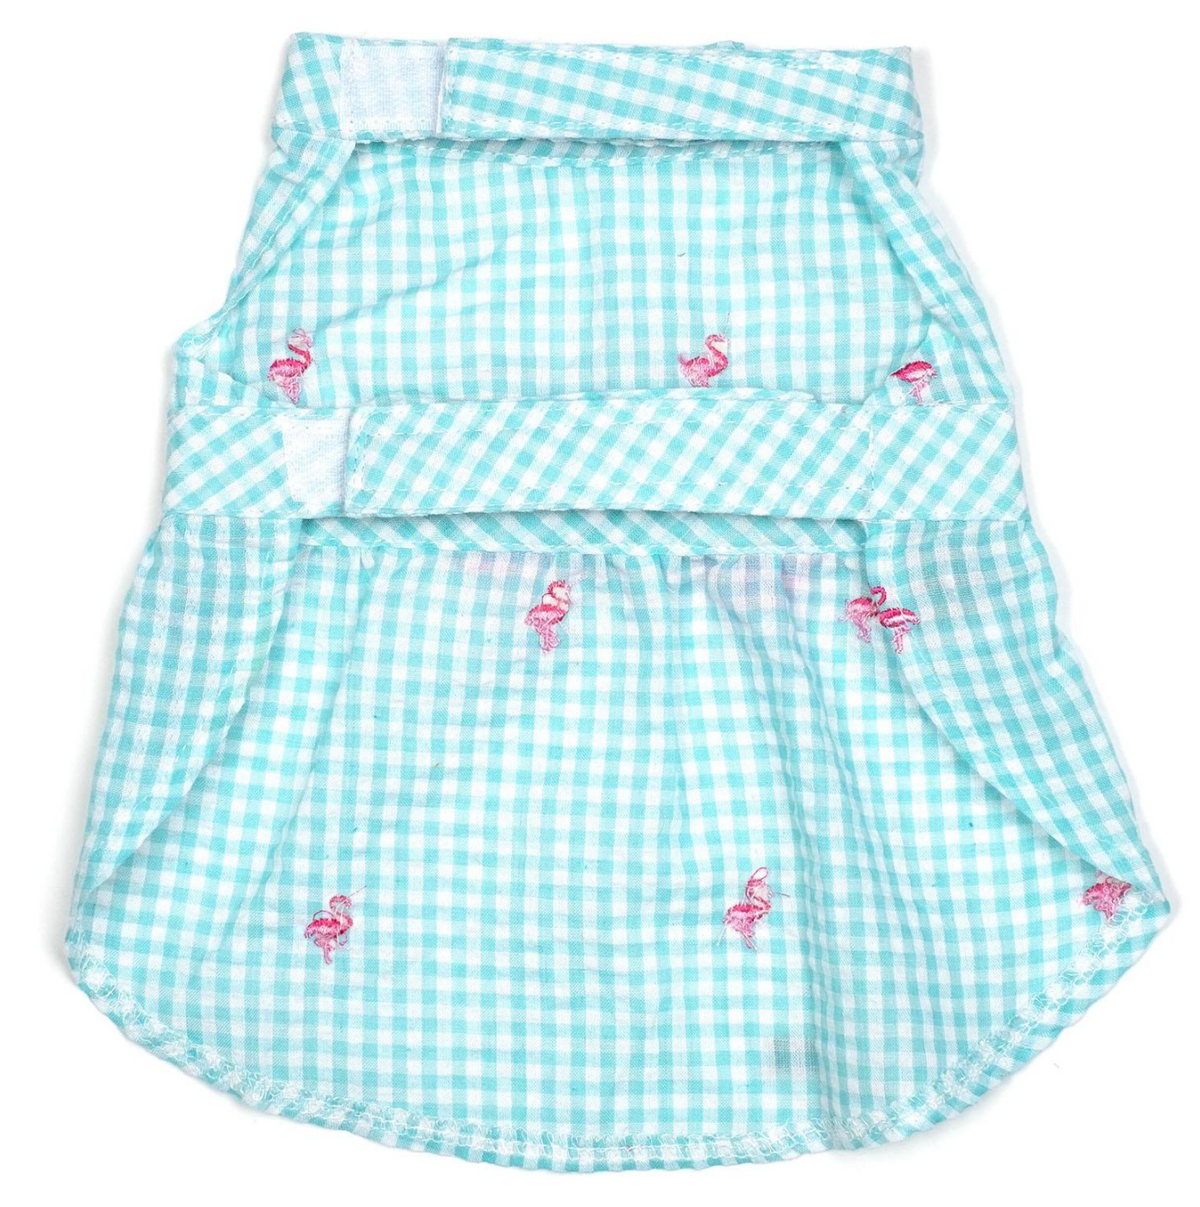 Gingham Flamingo Dress - 3 Red Rovers